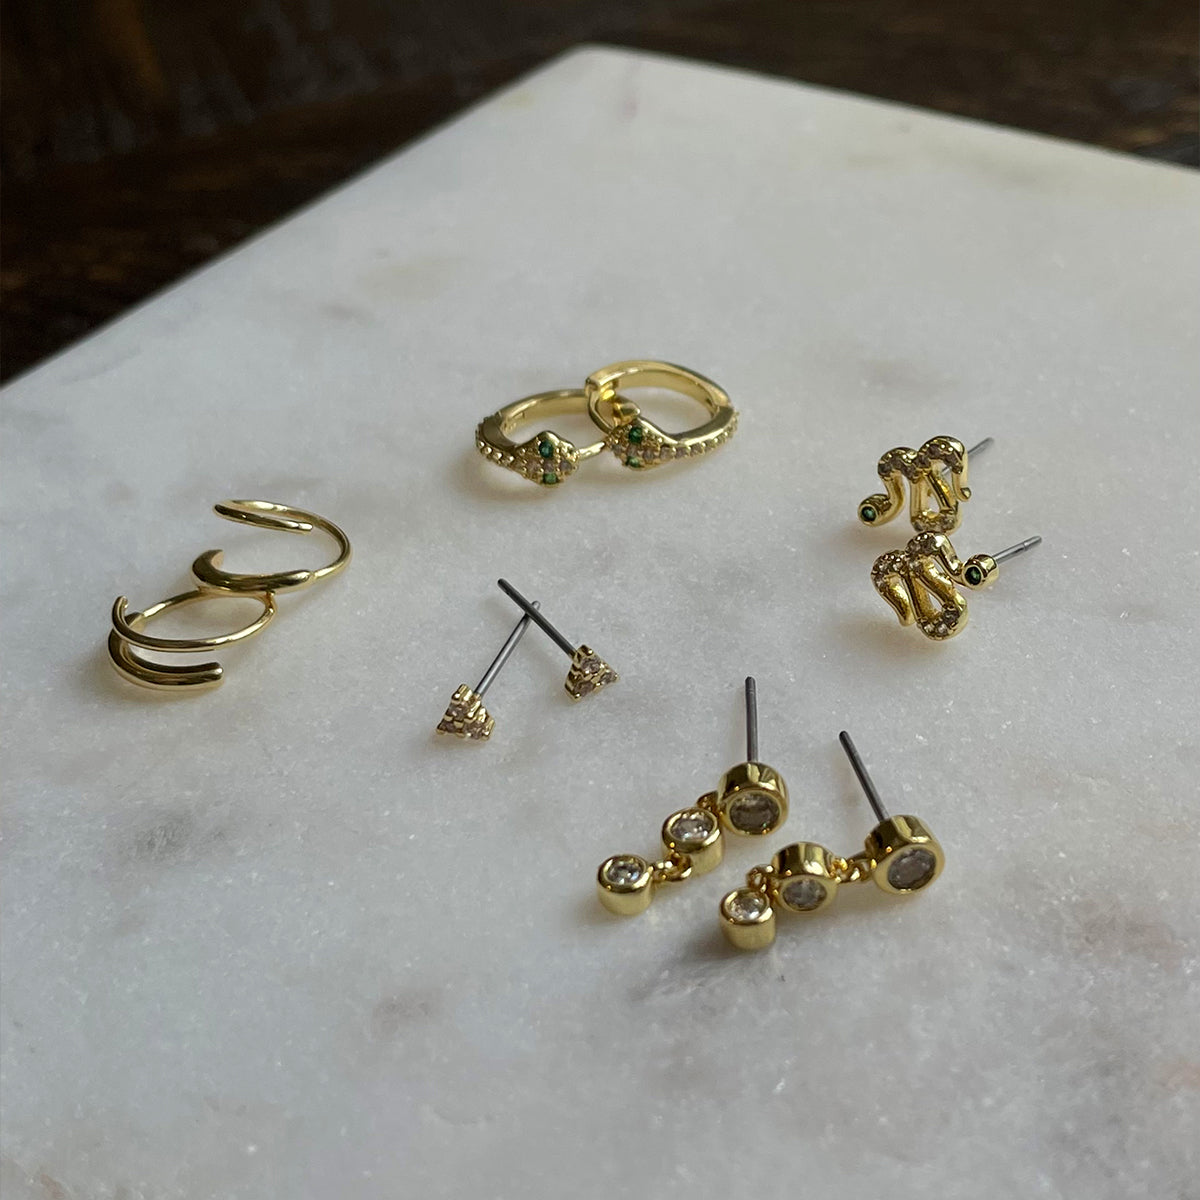 How to Find Best Gold Earring Design for Daily Use?